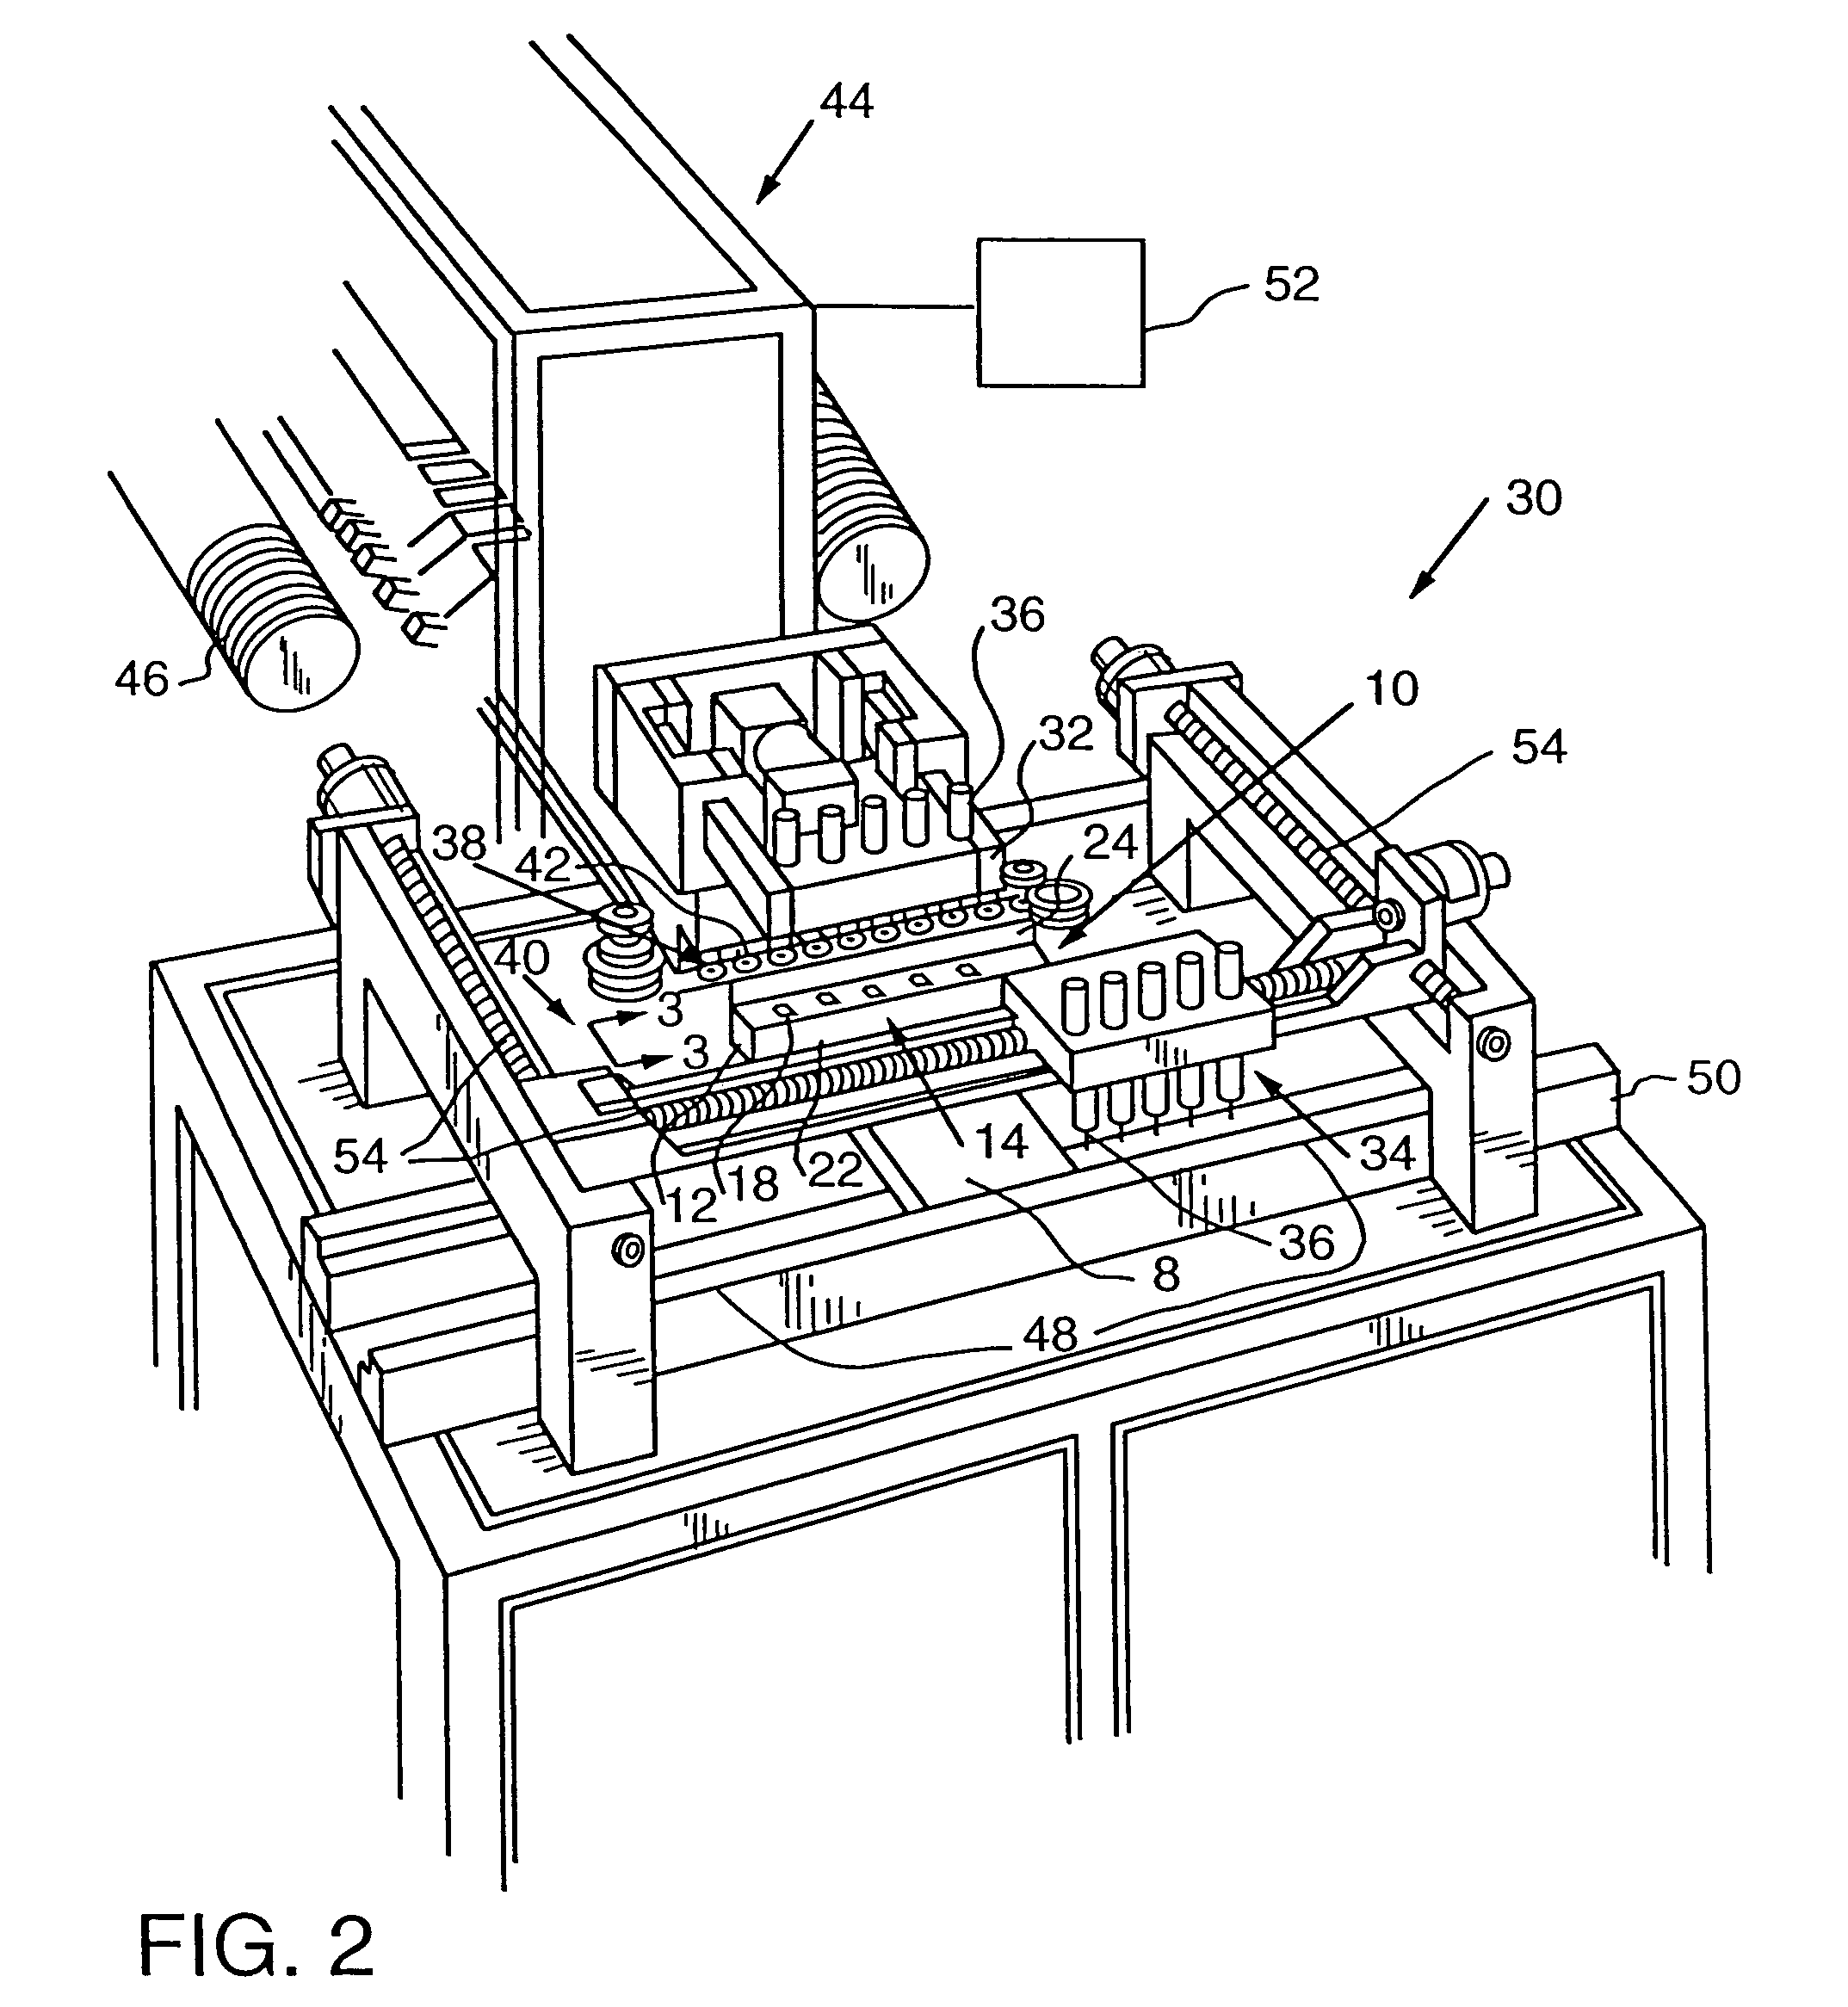 Component alignment apparatuses and methods